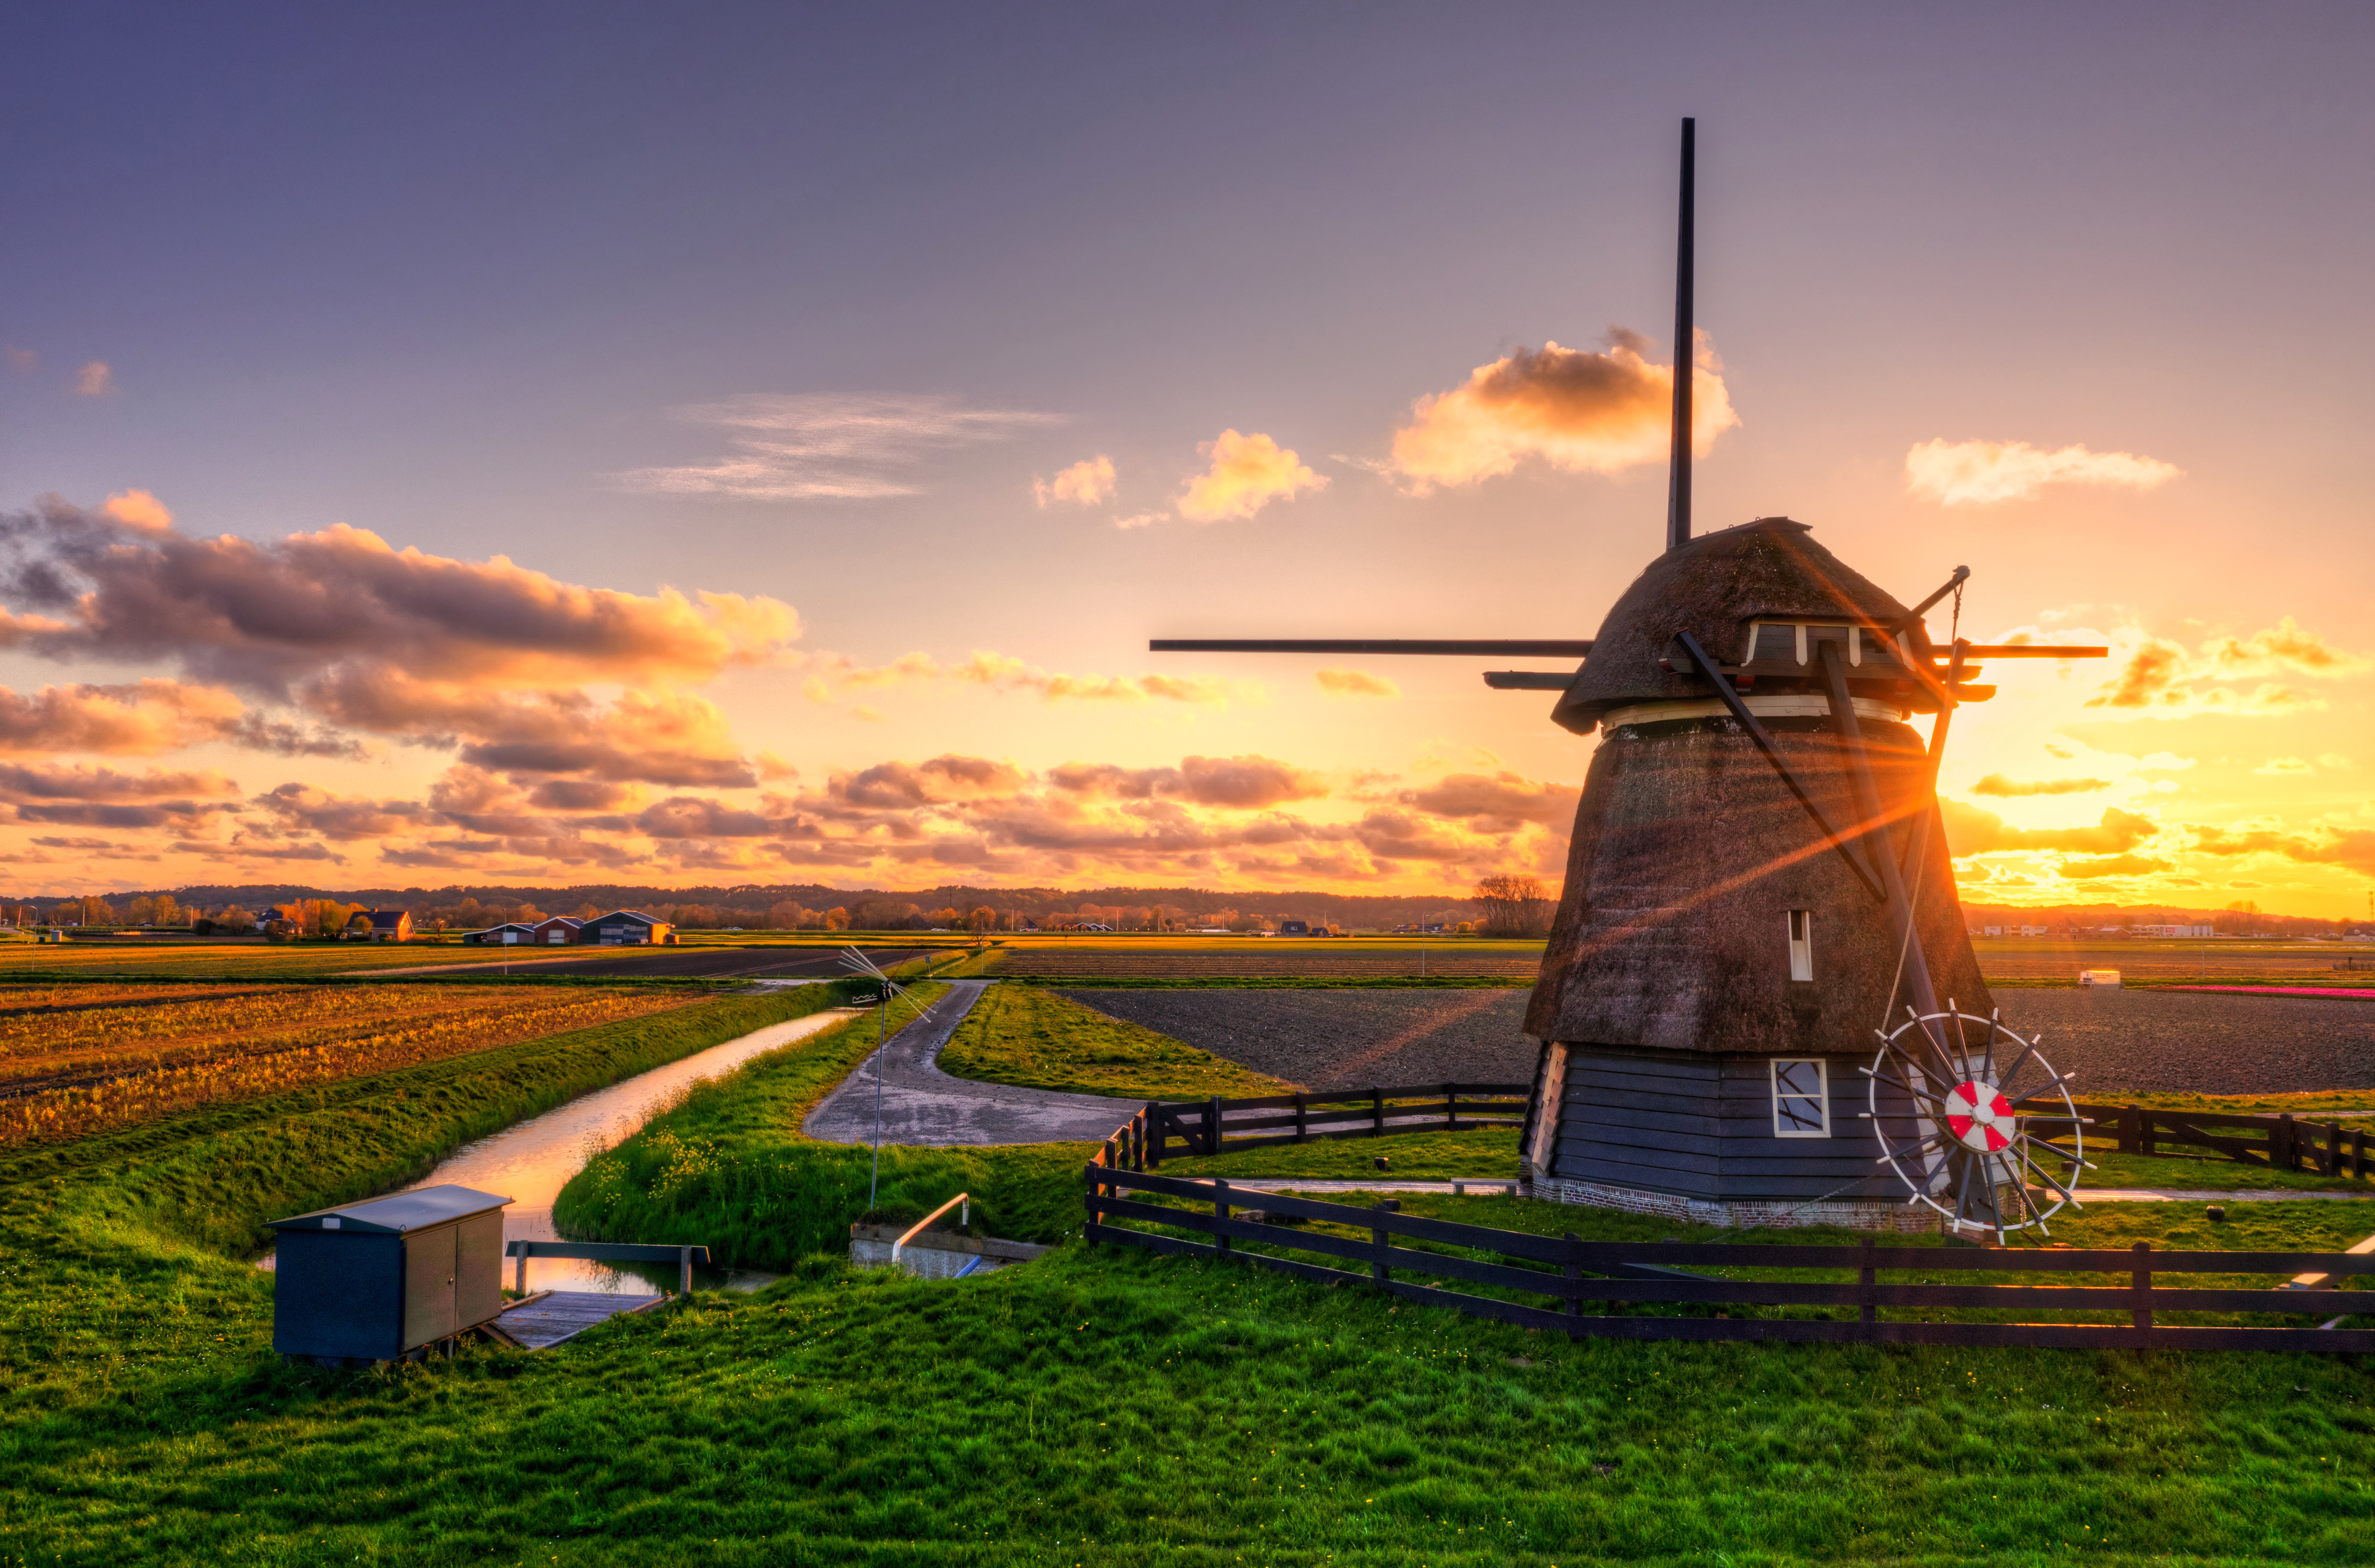 General 5120x3380 windmill field water landscape Sun sunset HDR clouds sky fence photography nature outdoors warm warm light